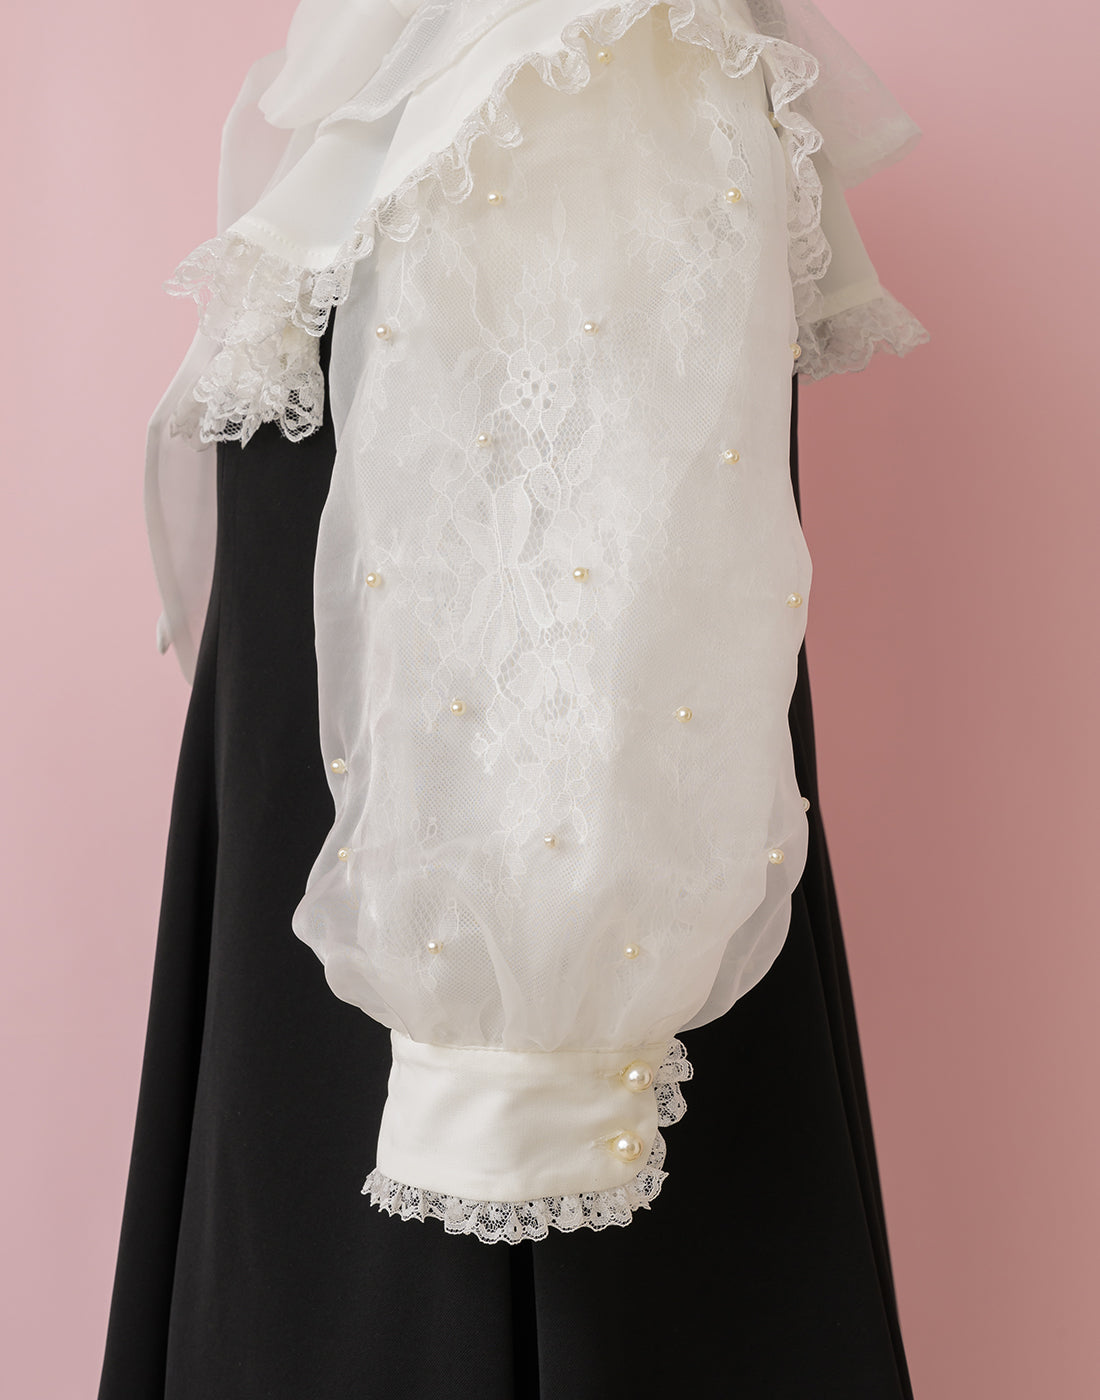 Lacy millefeuille frill collar ワンピース – mellfy memory